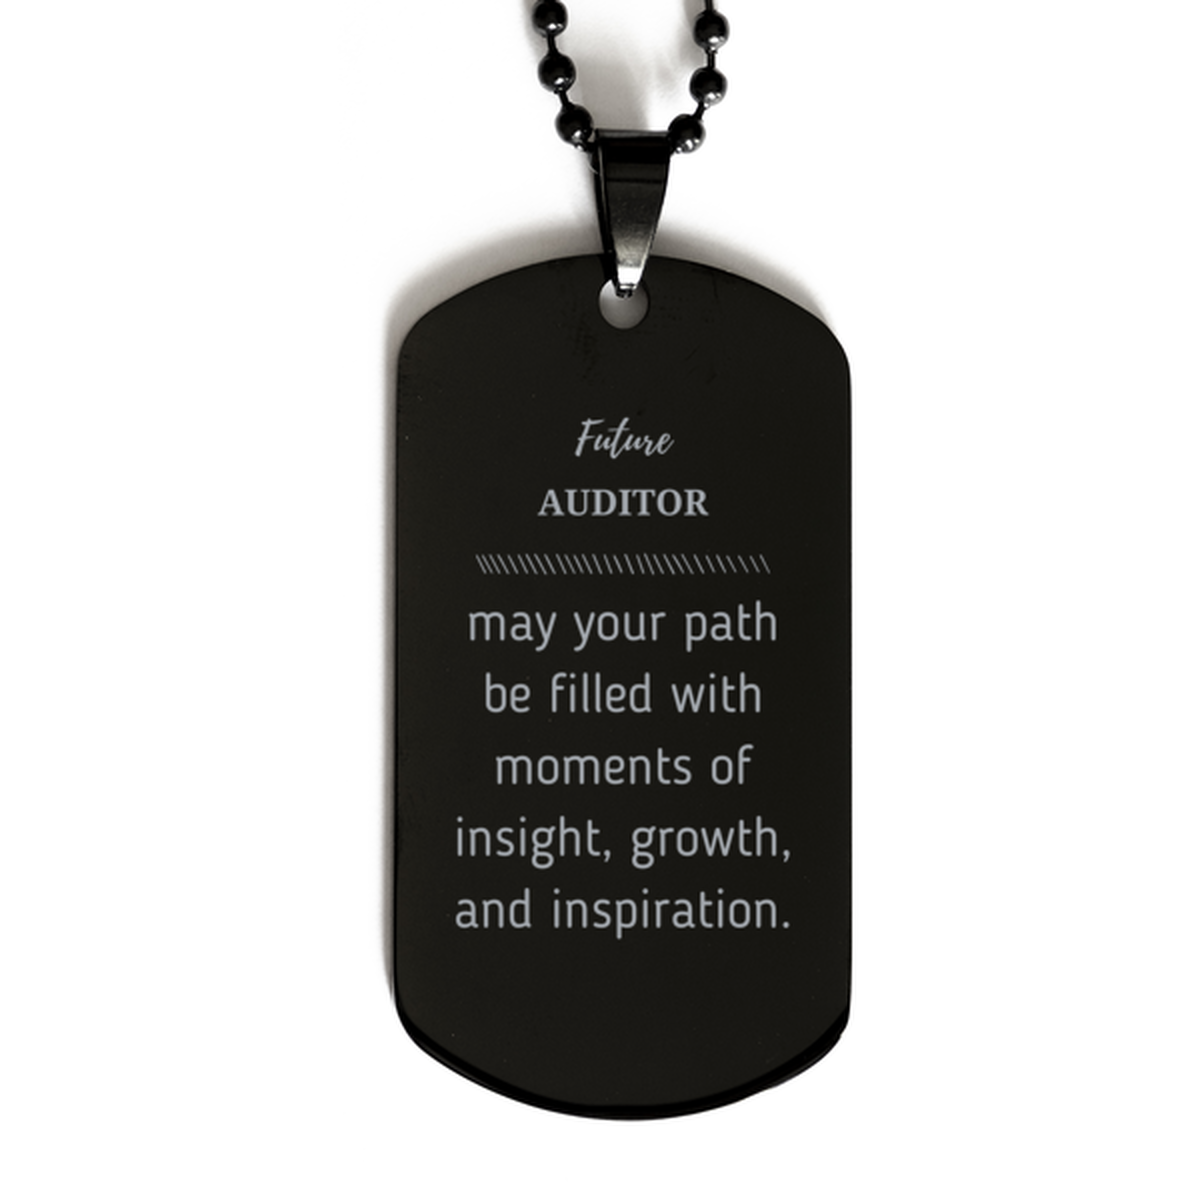 Future Auditor Gifts, May your path be filled with moments of insight, Graduation Gifts for New Auditor, Christmas Unique Black Dog Tag For Men, Women, Friends